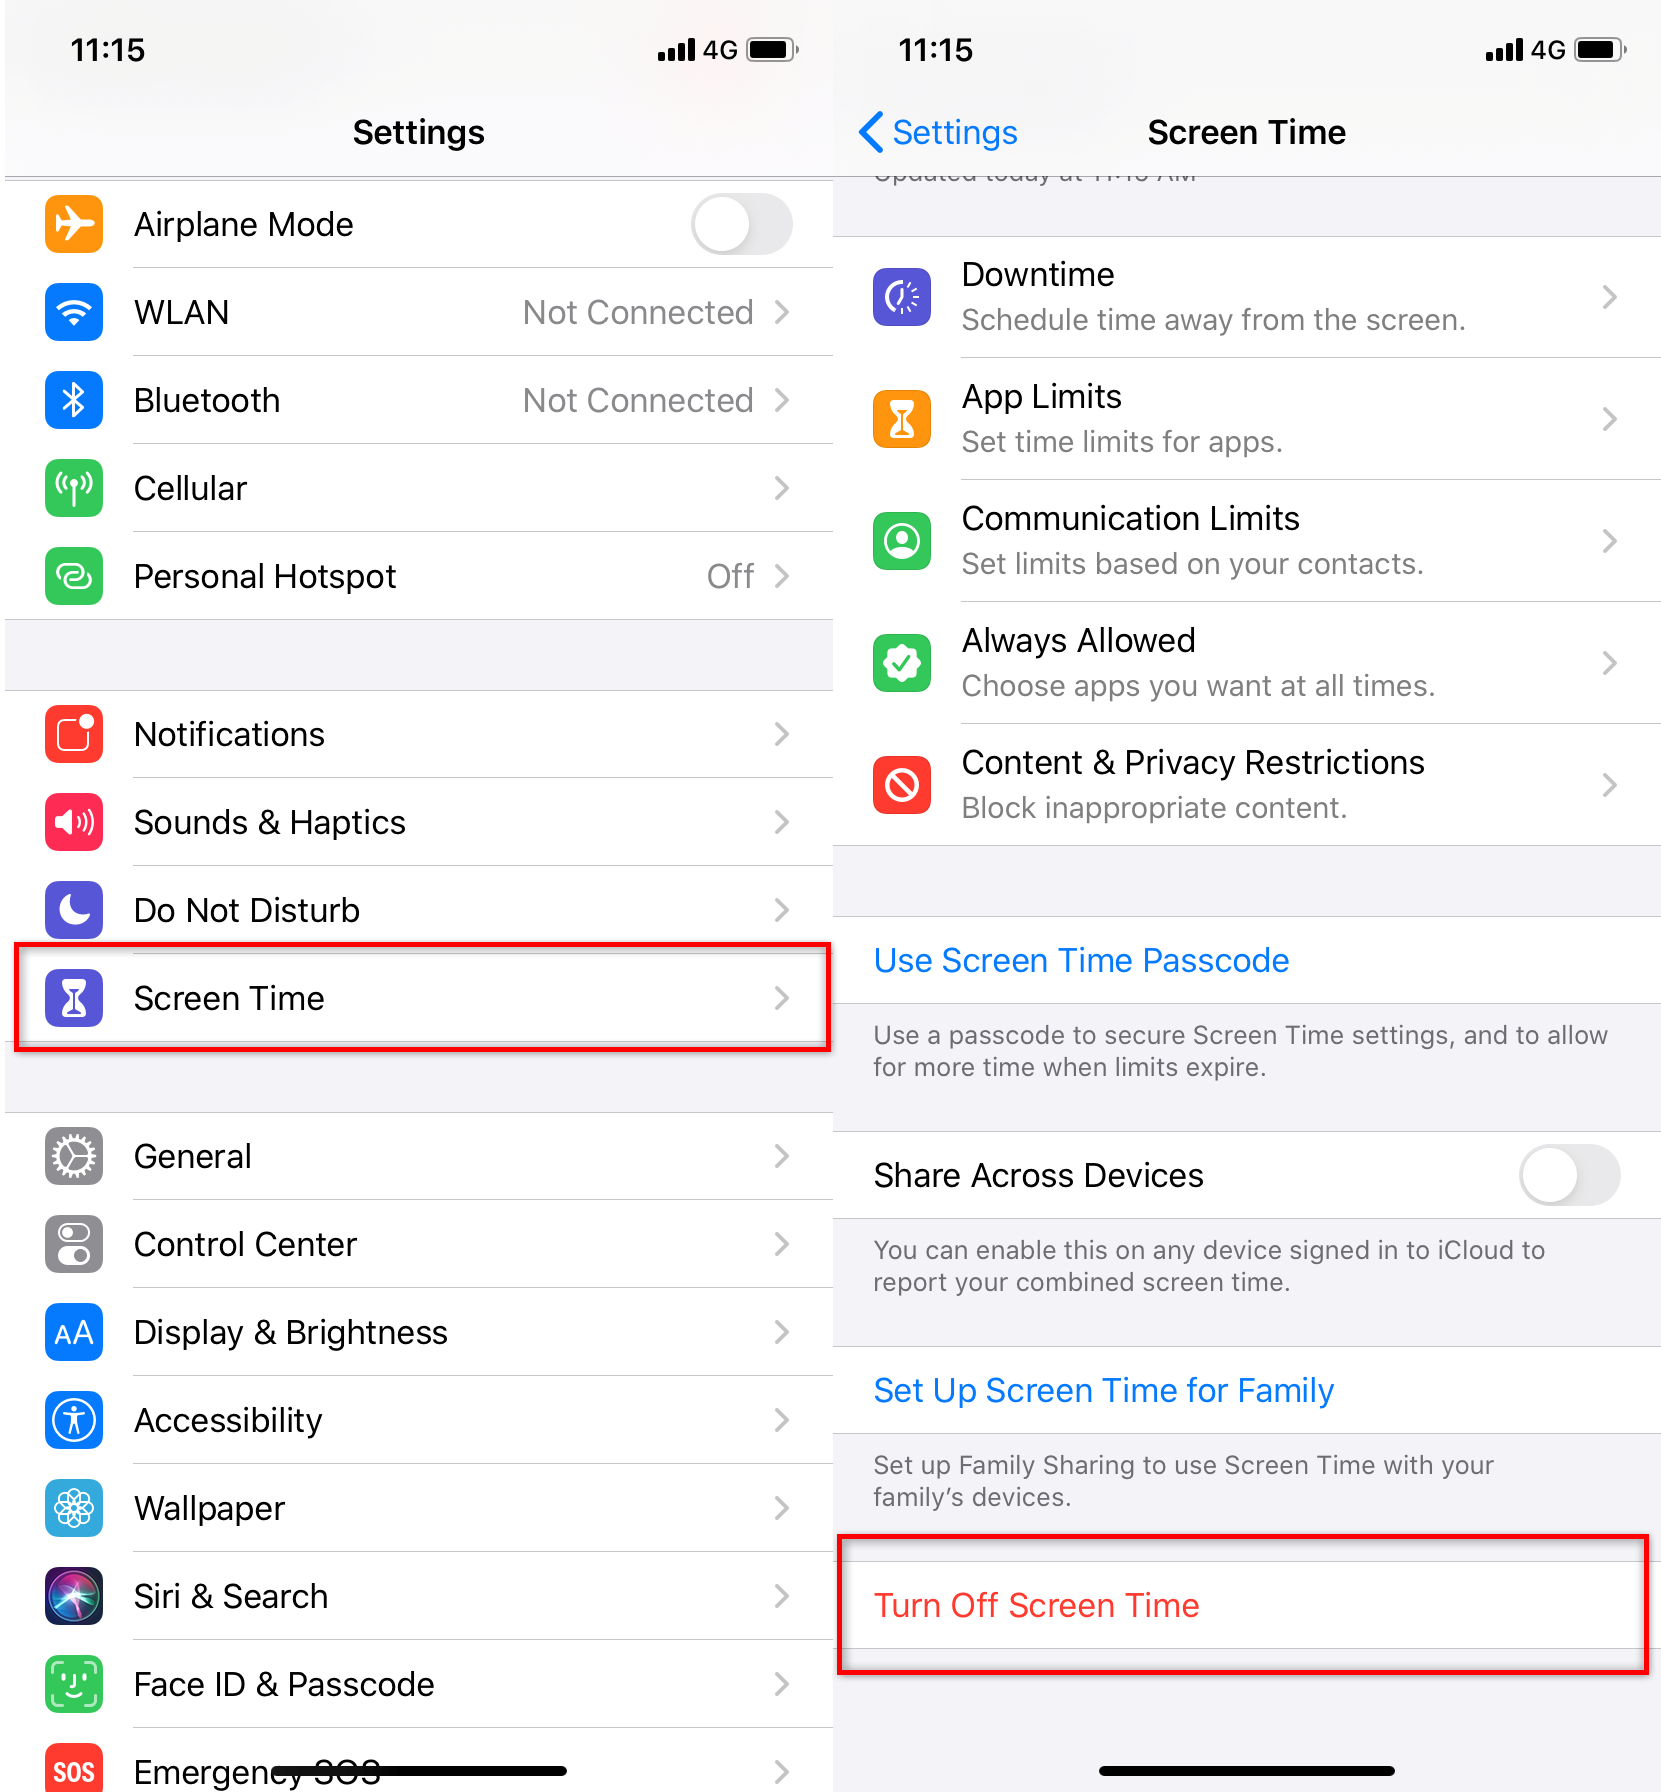 How to Turn Off Screen Time on iPhone/iPad